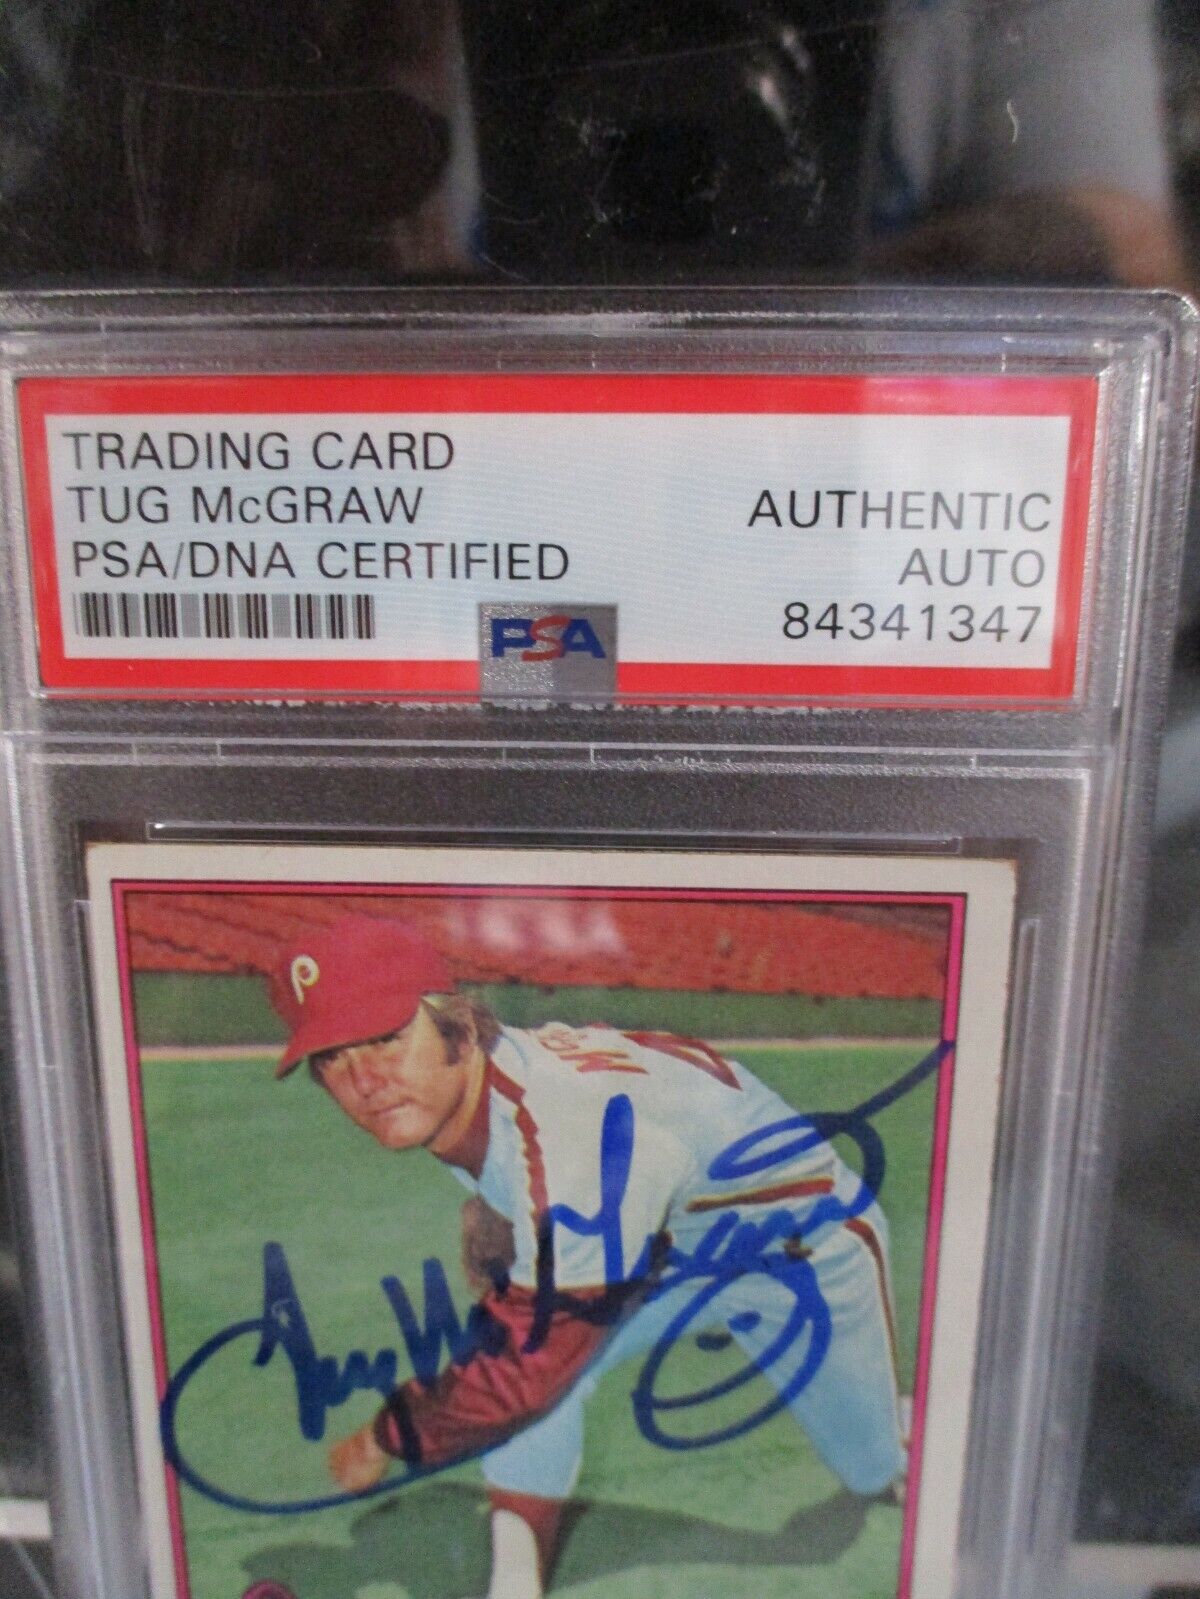 Tug McGraw 1976 Topps autographed card PSA SLABBED  84341347